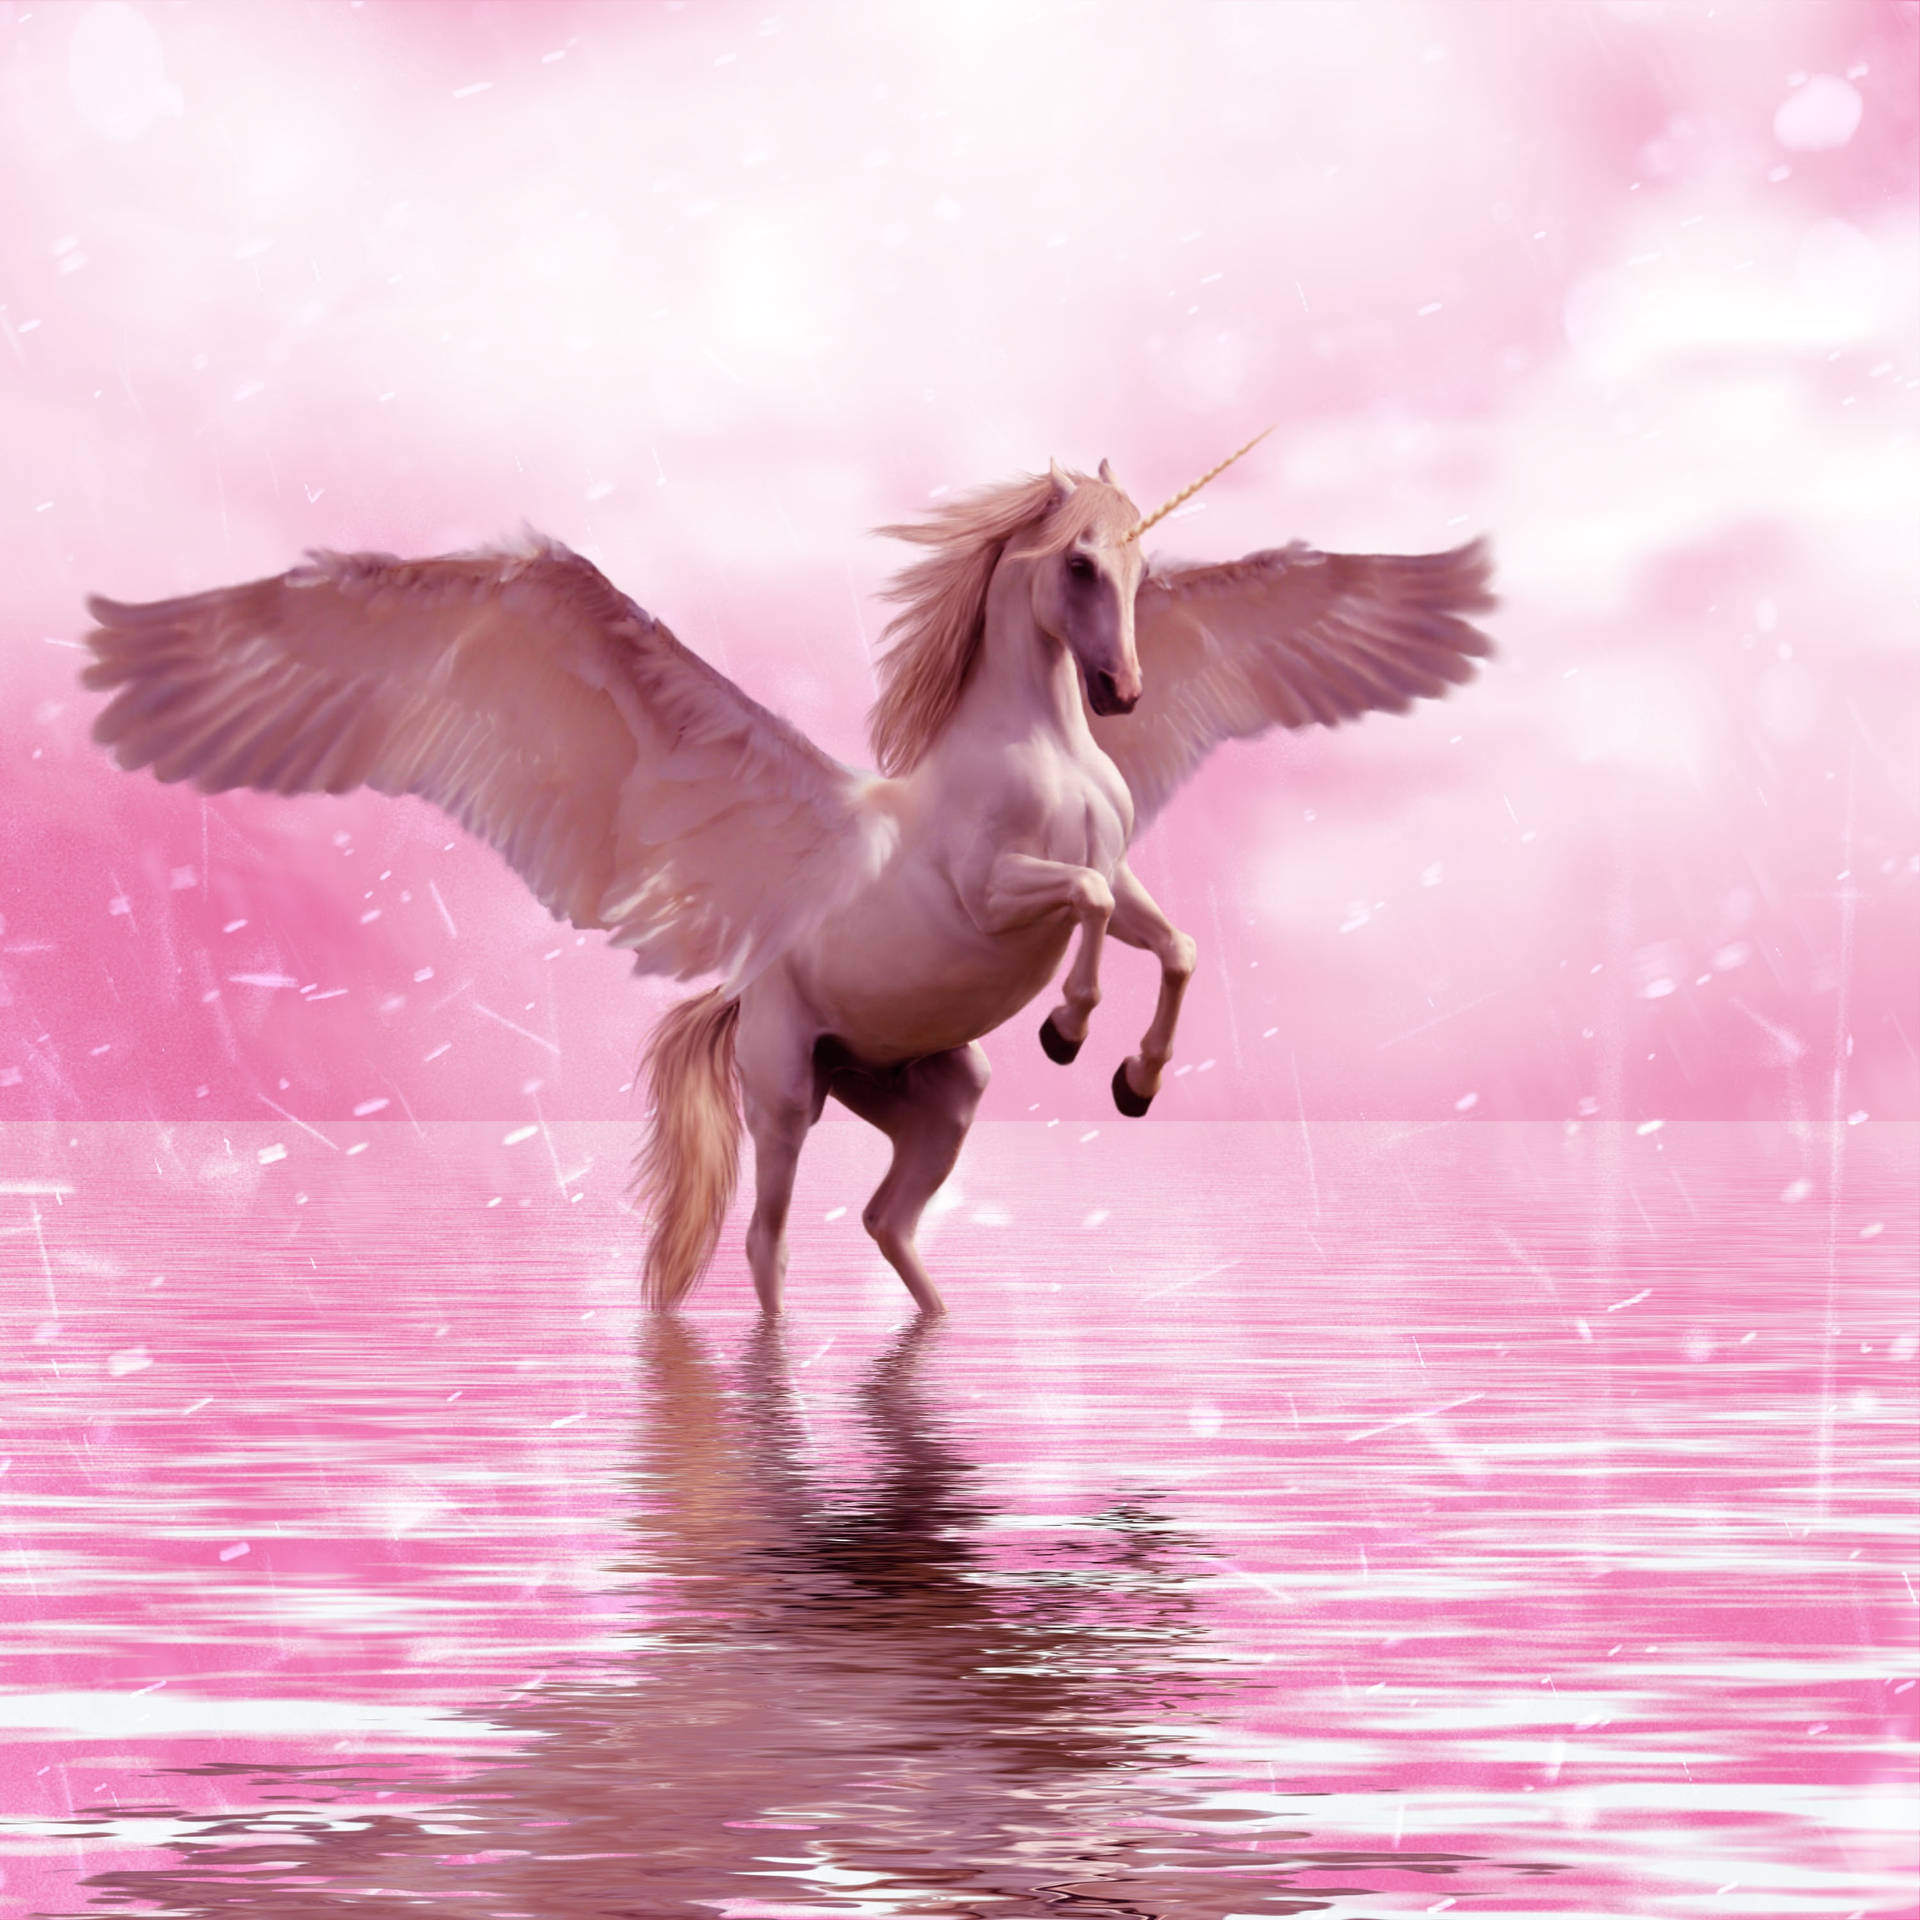 Magical, majestic unicorn swimming in a pink river. Wallpaper